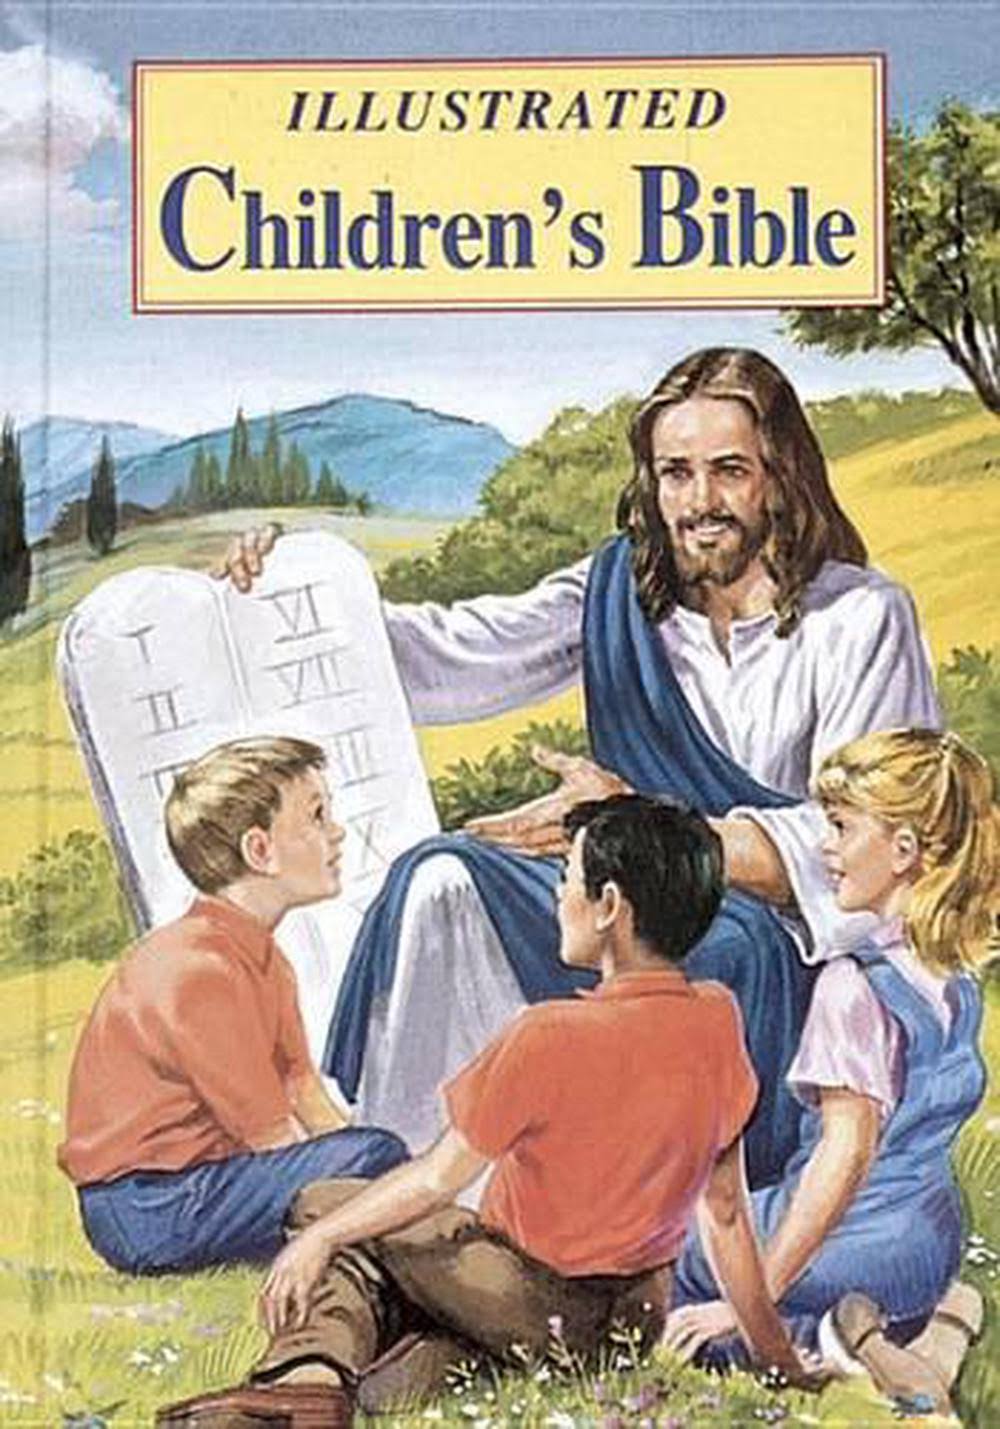 Illustrated Children's Bible [Book]